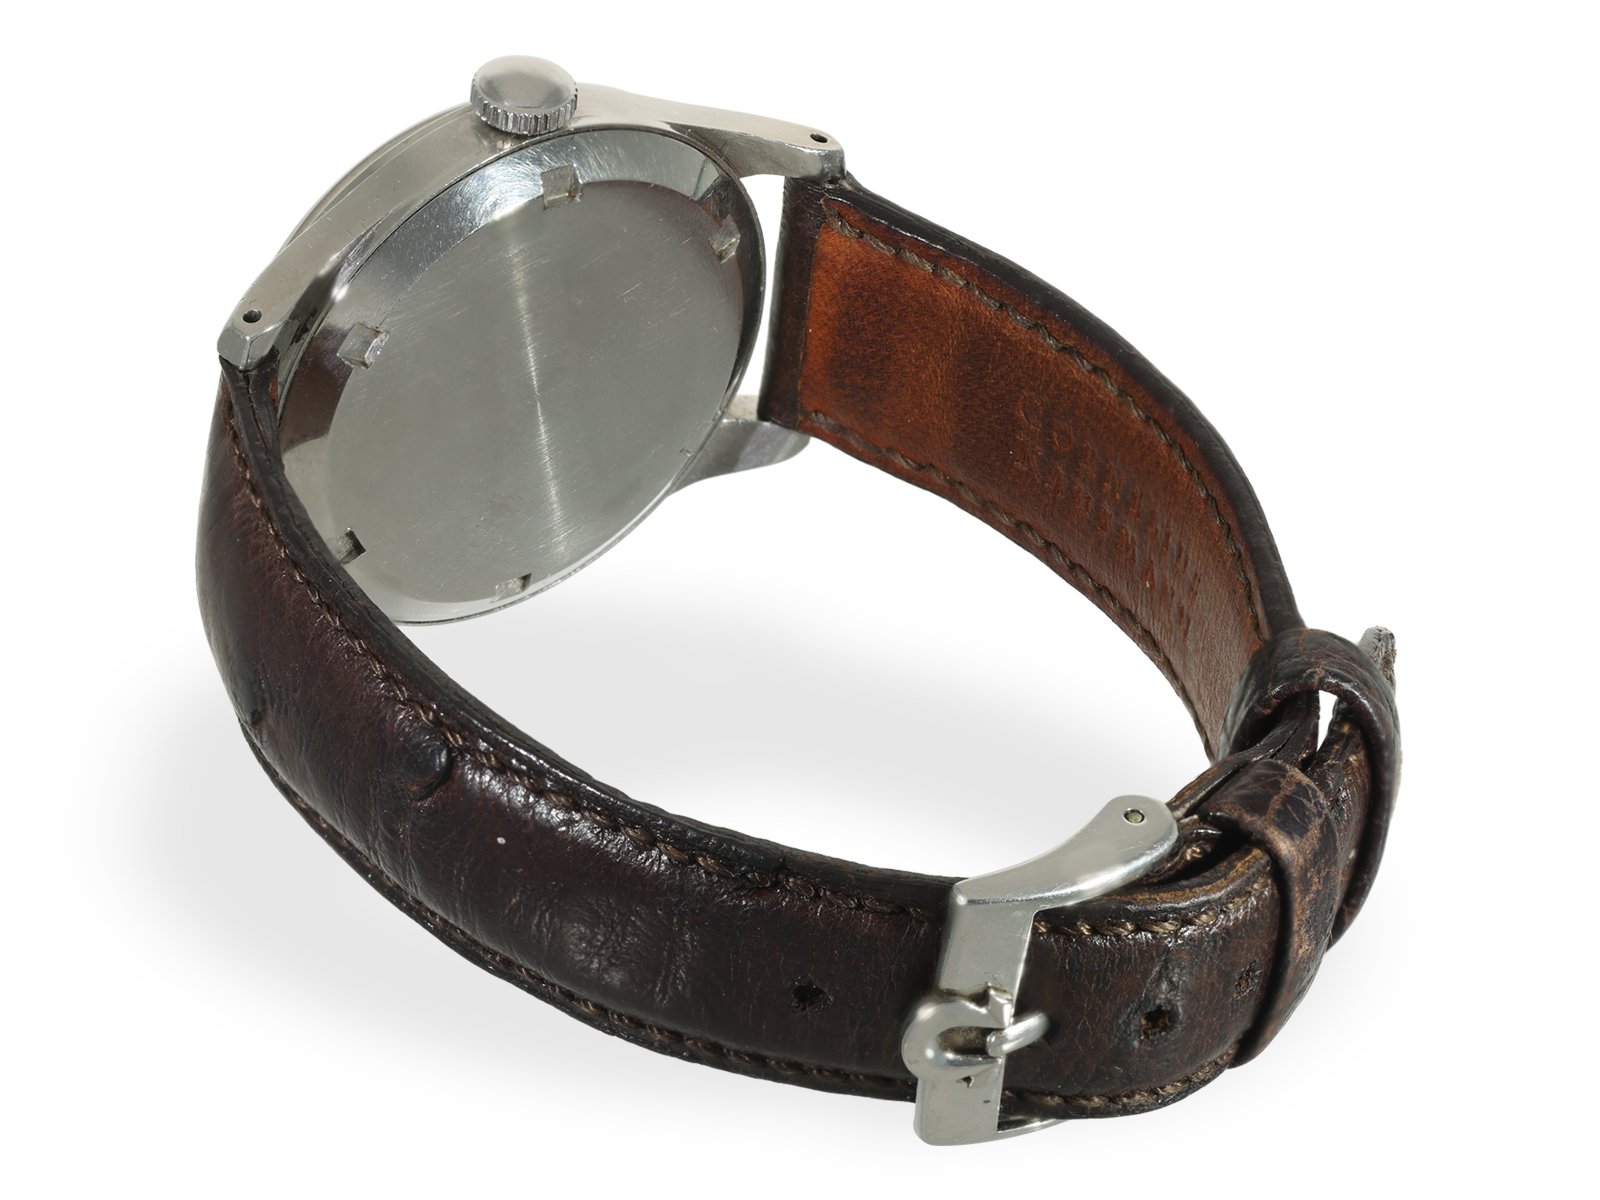 Wristwatch: rare, large Omega "Sei Tacche" Ref. 2383-6 from 1948 - Image 3 of 5